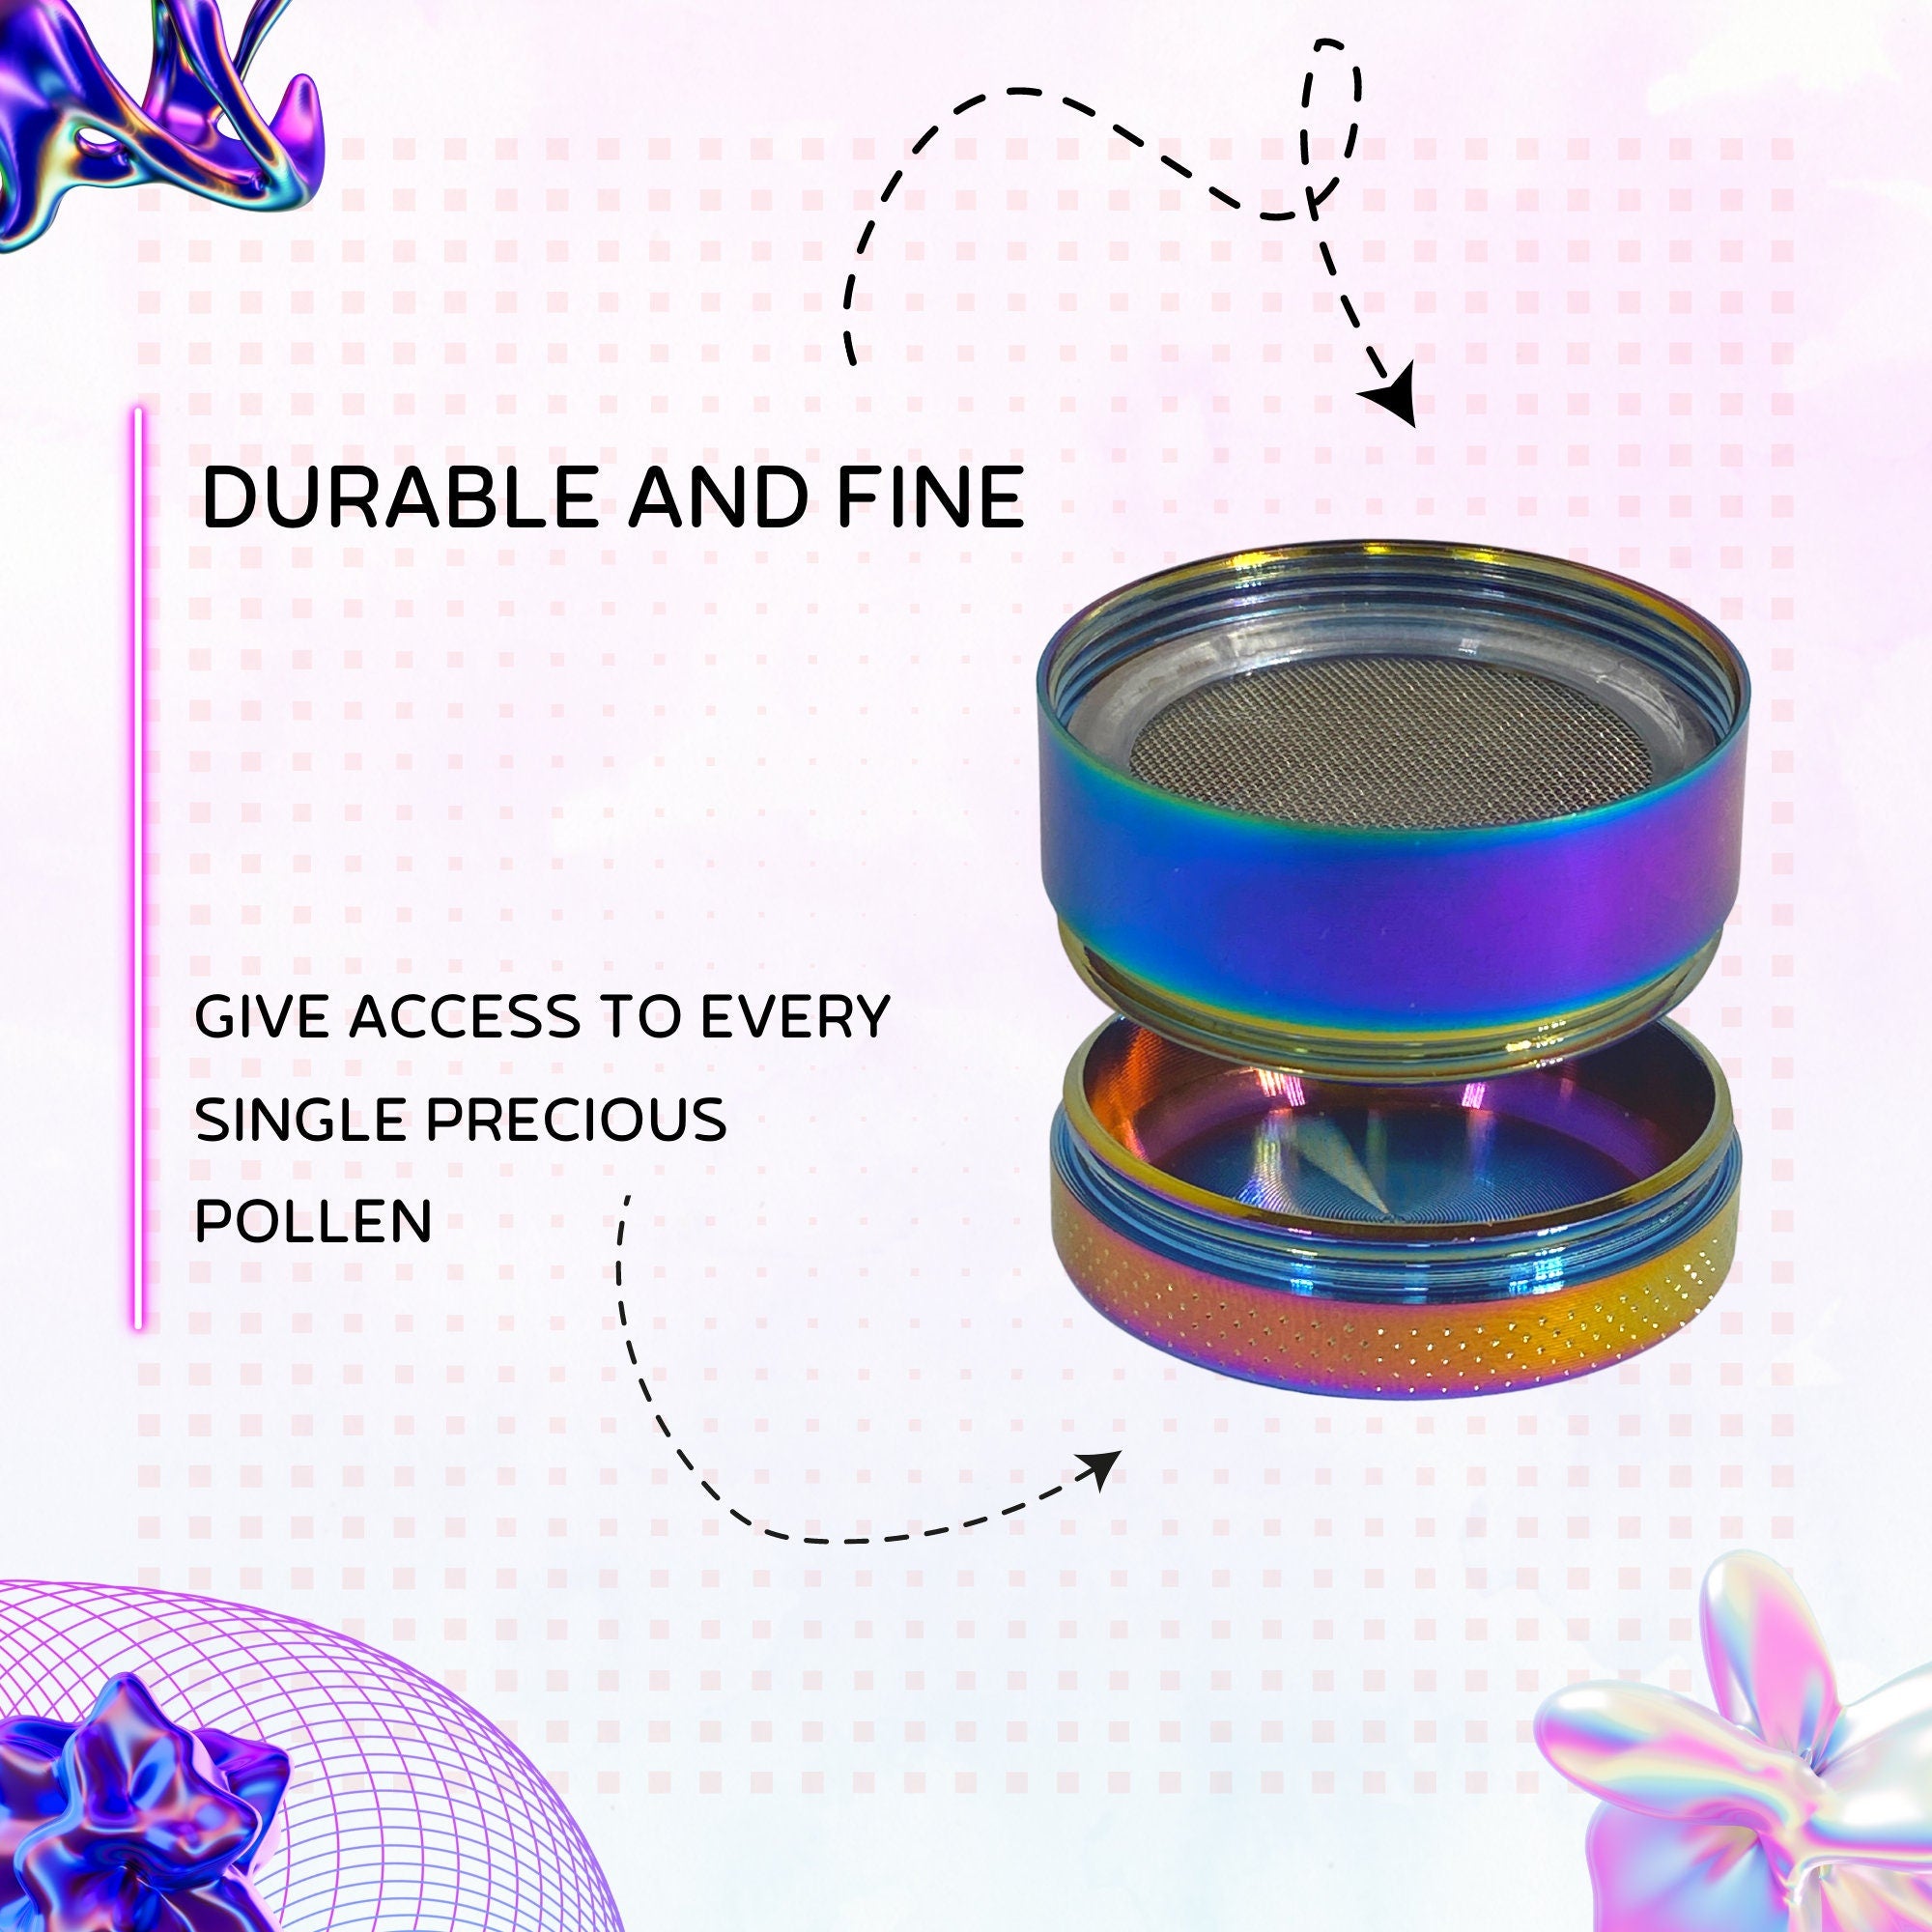 Cute Weed Grinder: iridescent grinder UFO Alien space, cannabis grinders, weed accessories, 4 piece, cannabis, Psychedelic Trippy Herb Girly